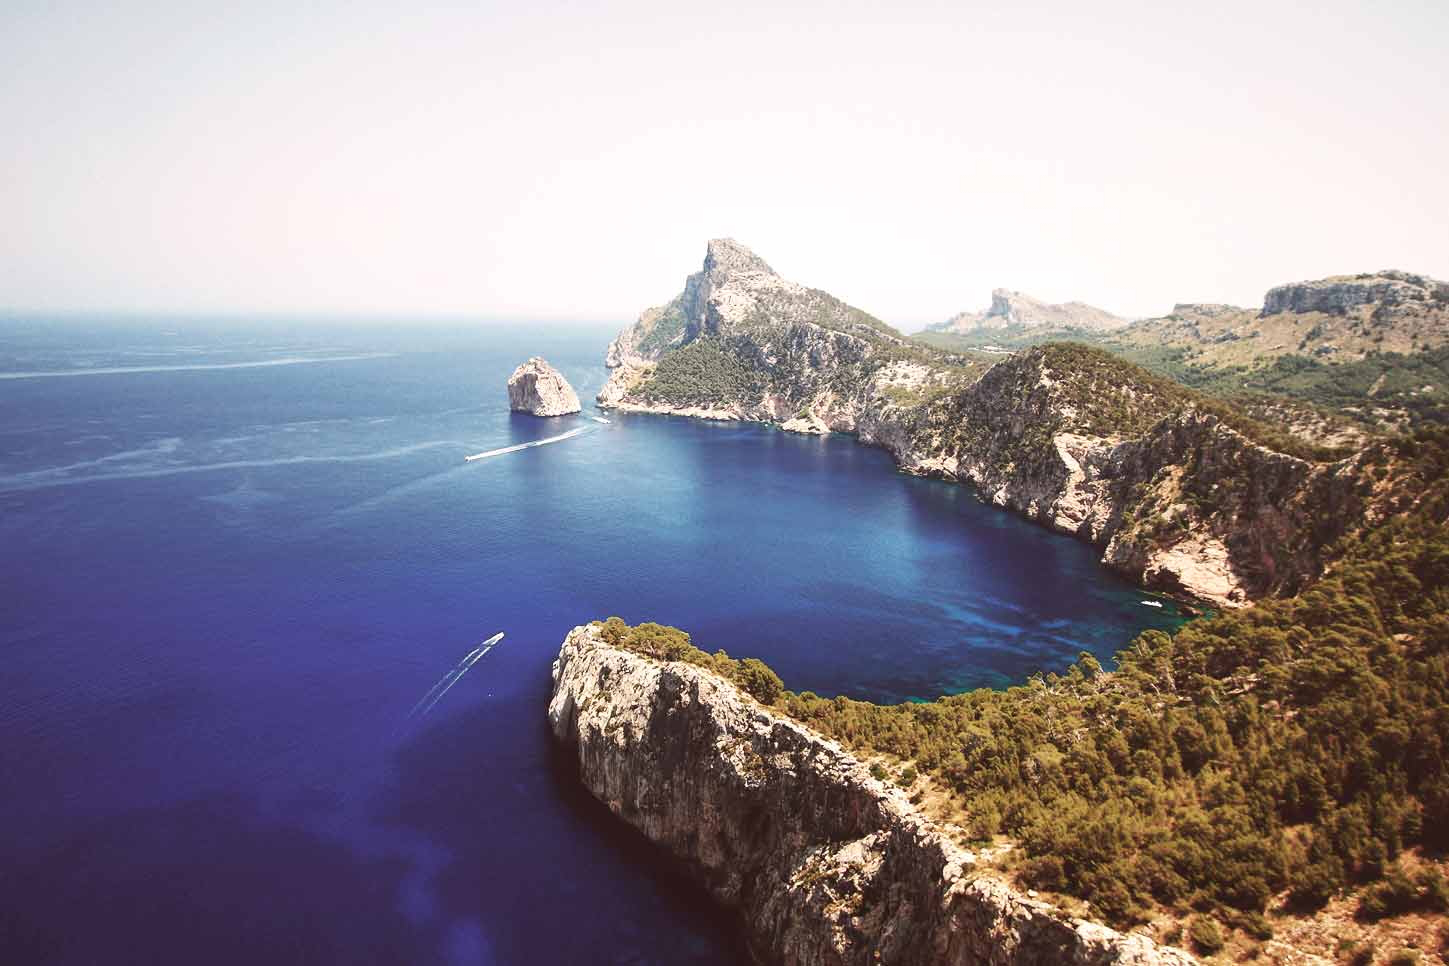 A Formentor boat trip could be the high spot of your holiday in Mallorca